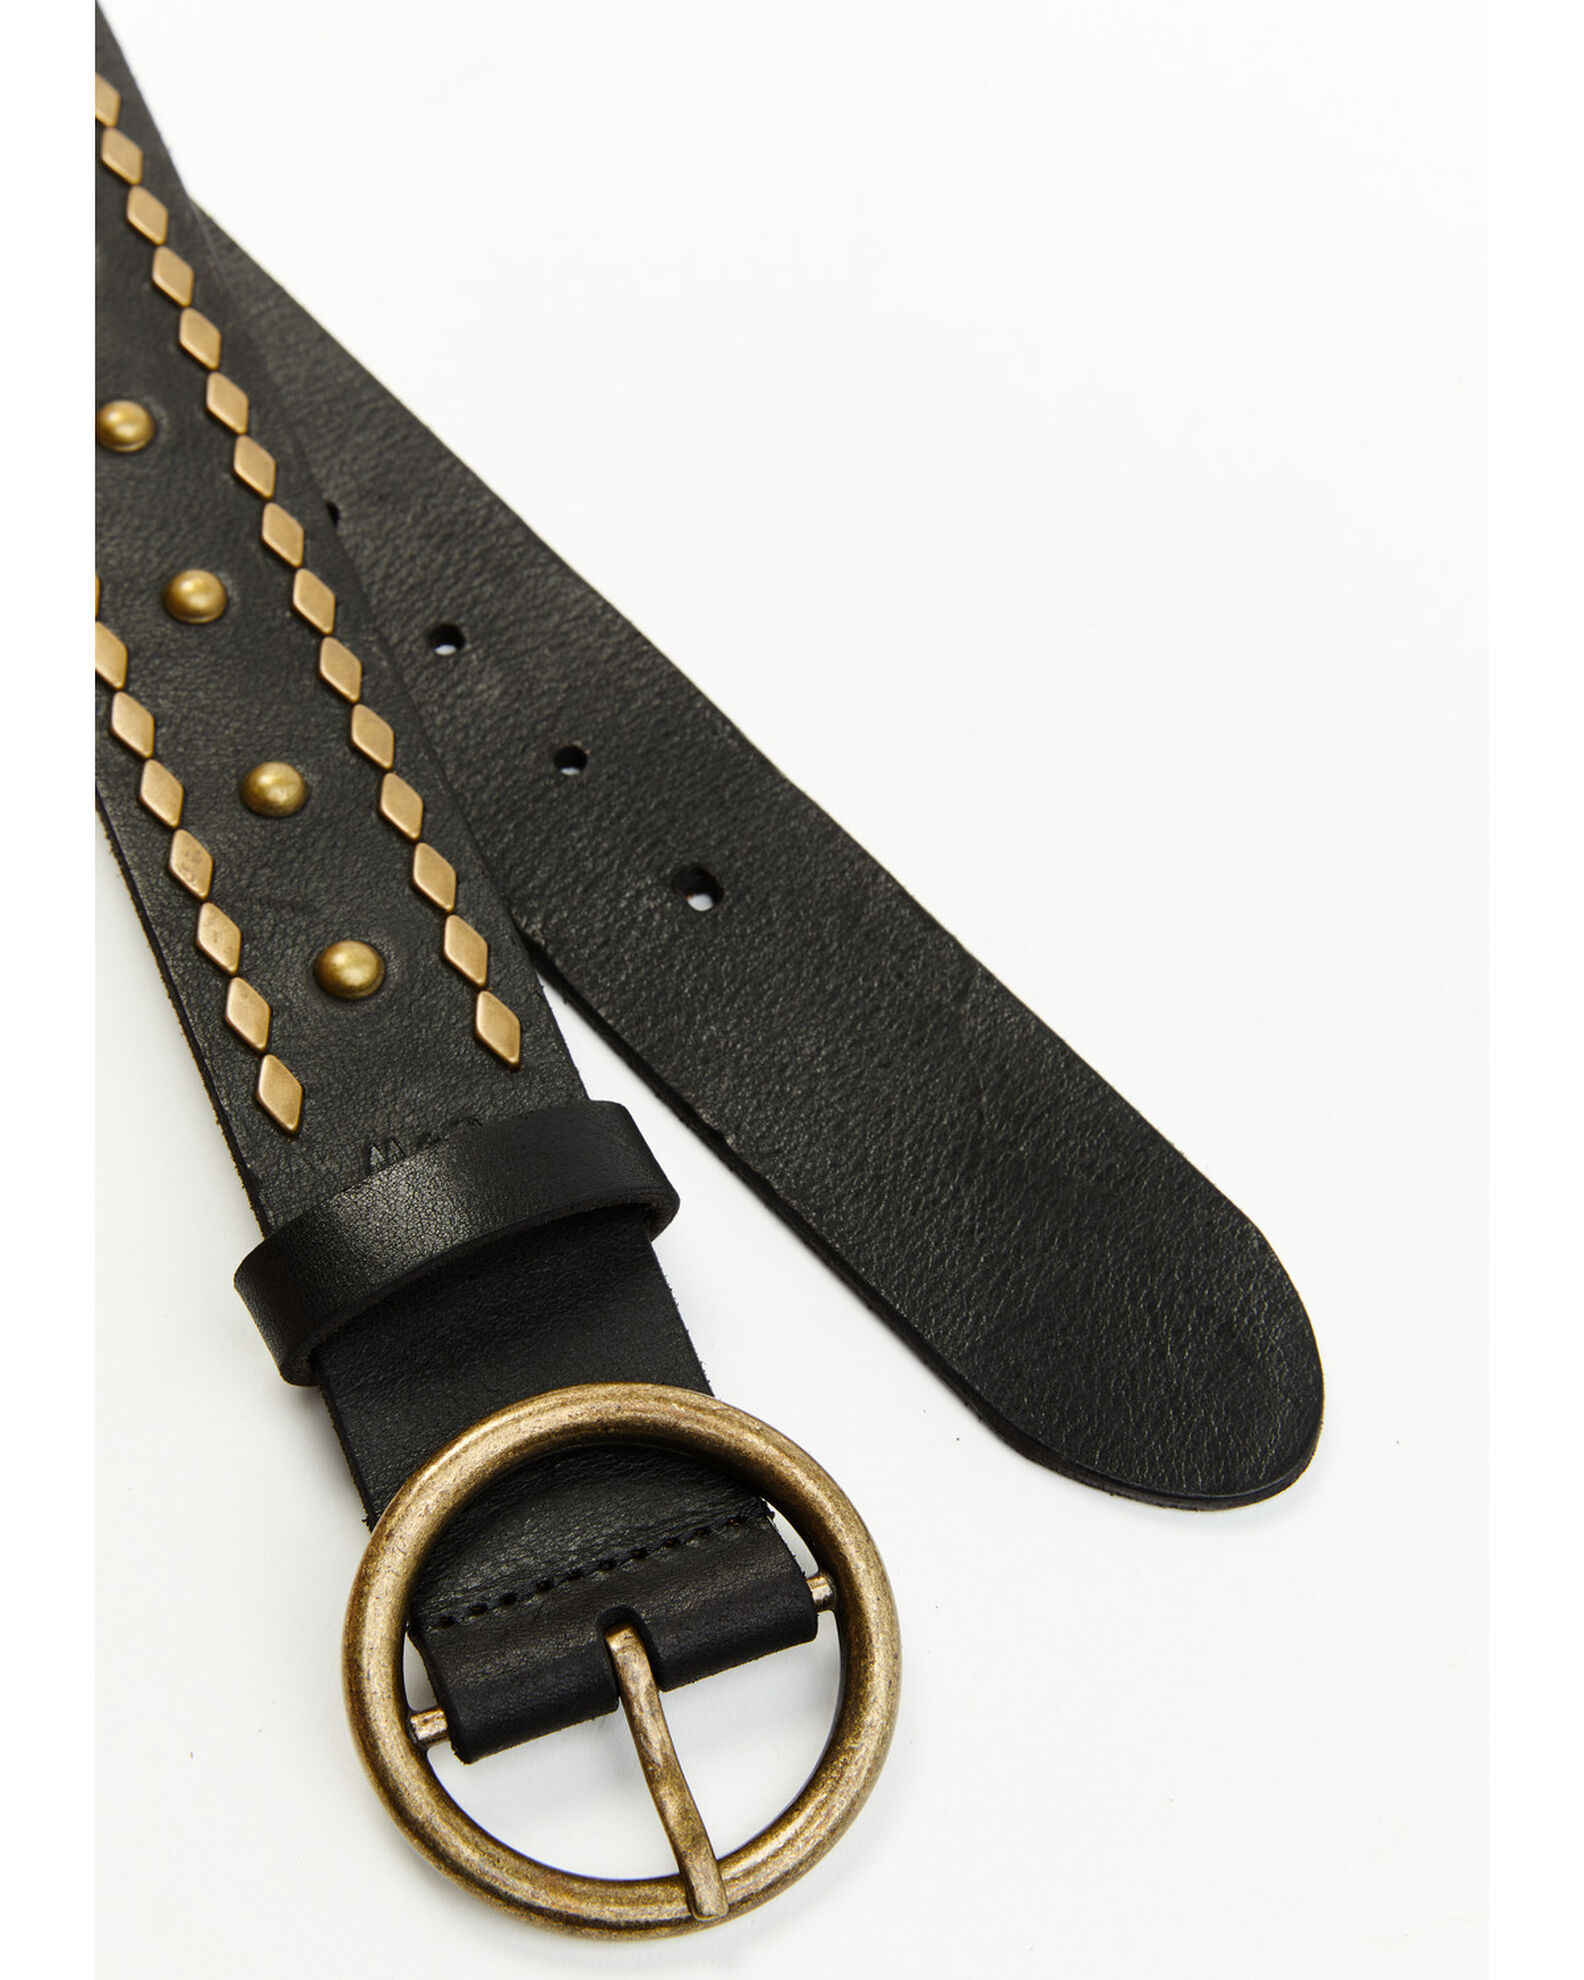 Product Name: Cleo + Wolf Women's Studded Leather Belt